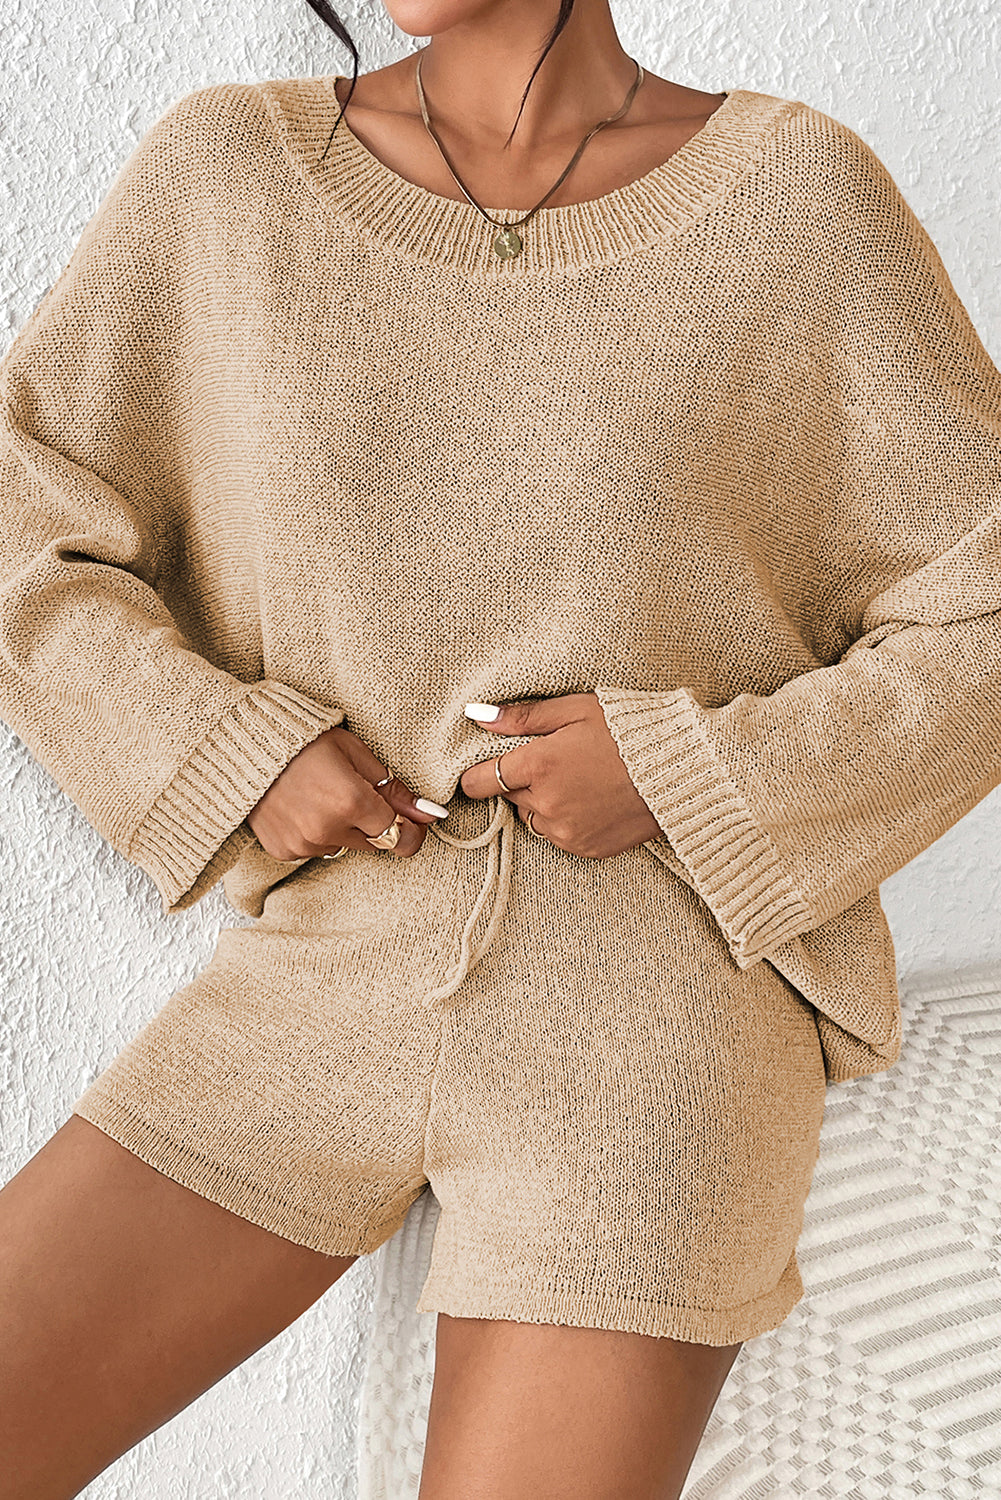 Khaki Solid Sweater Drawstring Shorts Outfit